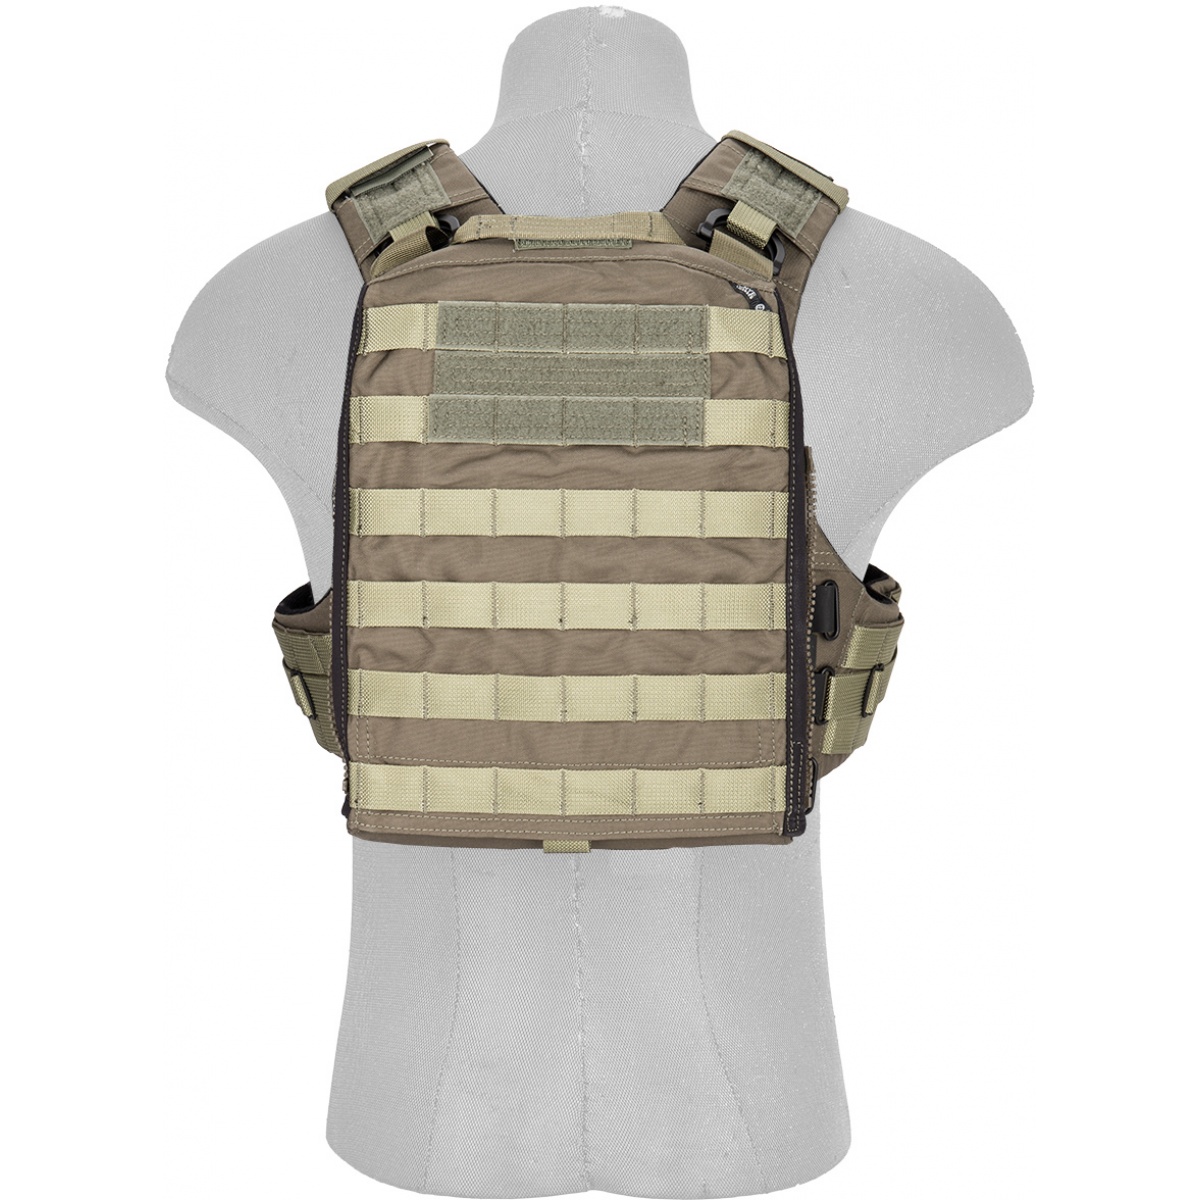 Crye Precision AVS-AC (Adaptive Vest System-Assault Configuration) Modular  Tactical Armor Plate Carrier goes from Lo-Pro/Lo-Vis to Full-Load-Bearing  Tactical Vest (Body Armor) –  (DR): An online tactical  technology and military defense